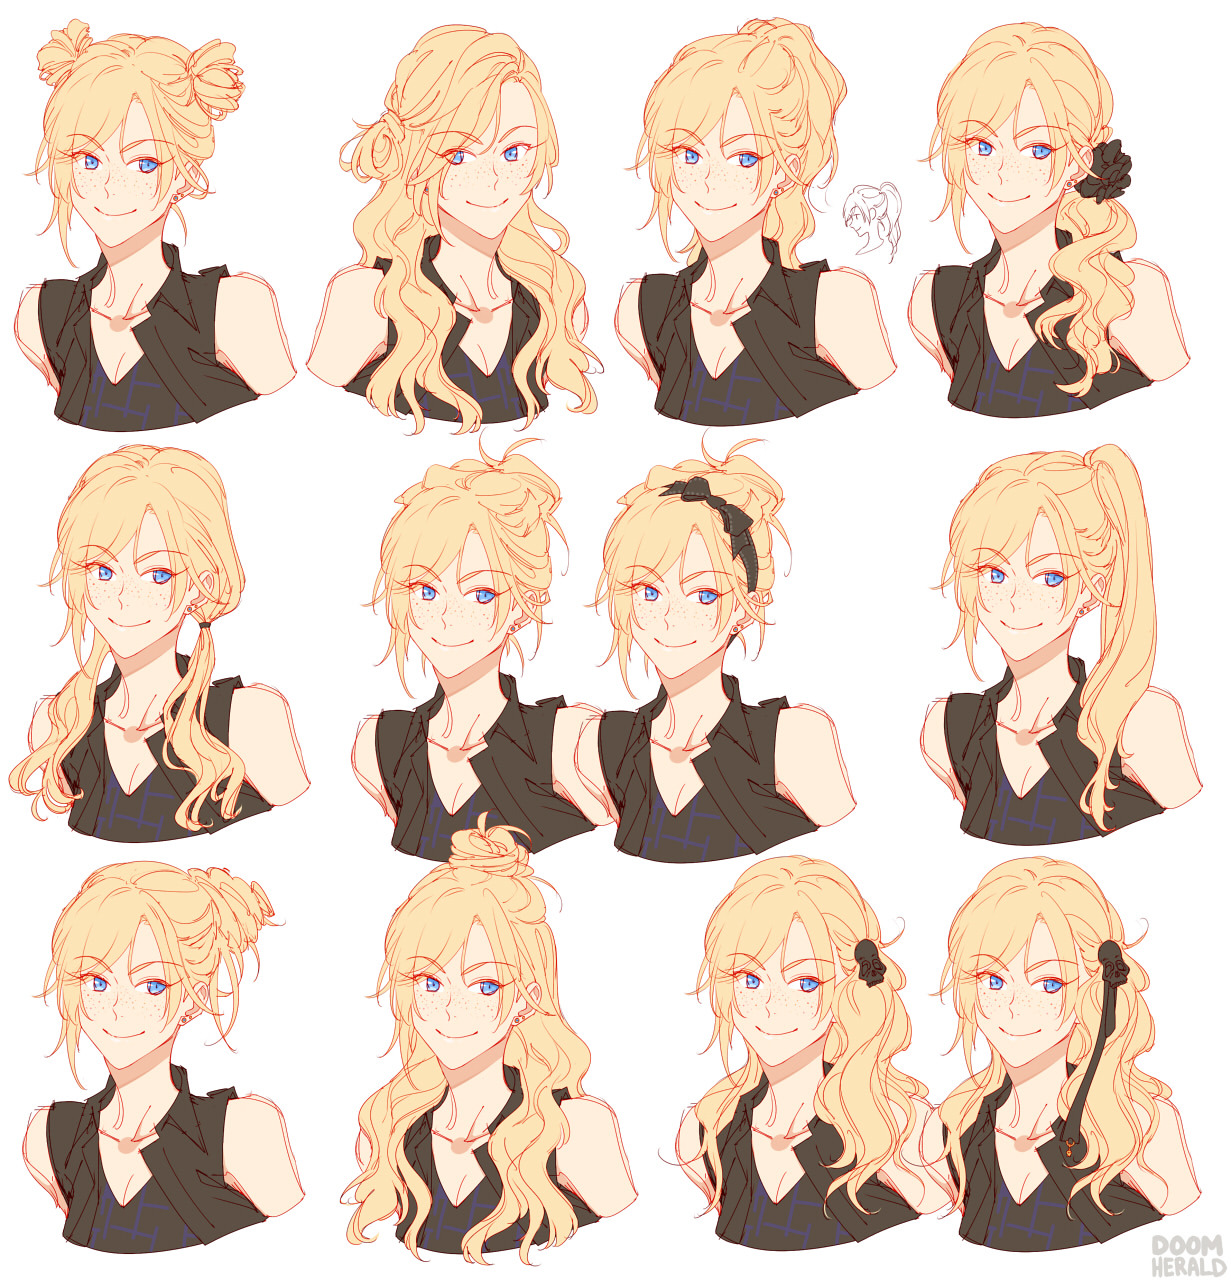 doomherald: long time no art! here are some hairstyle ideas for ffxv swaps. originally